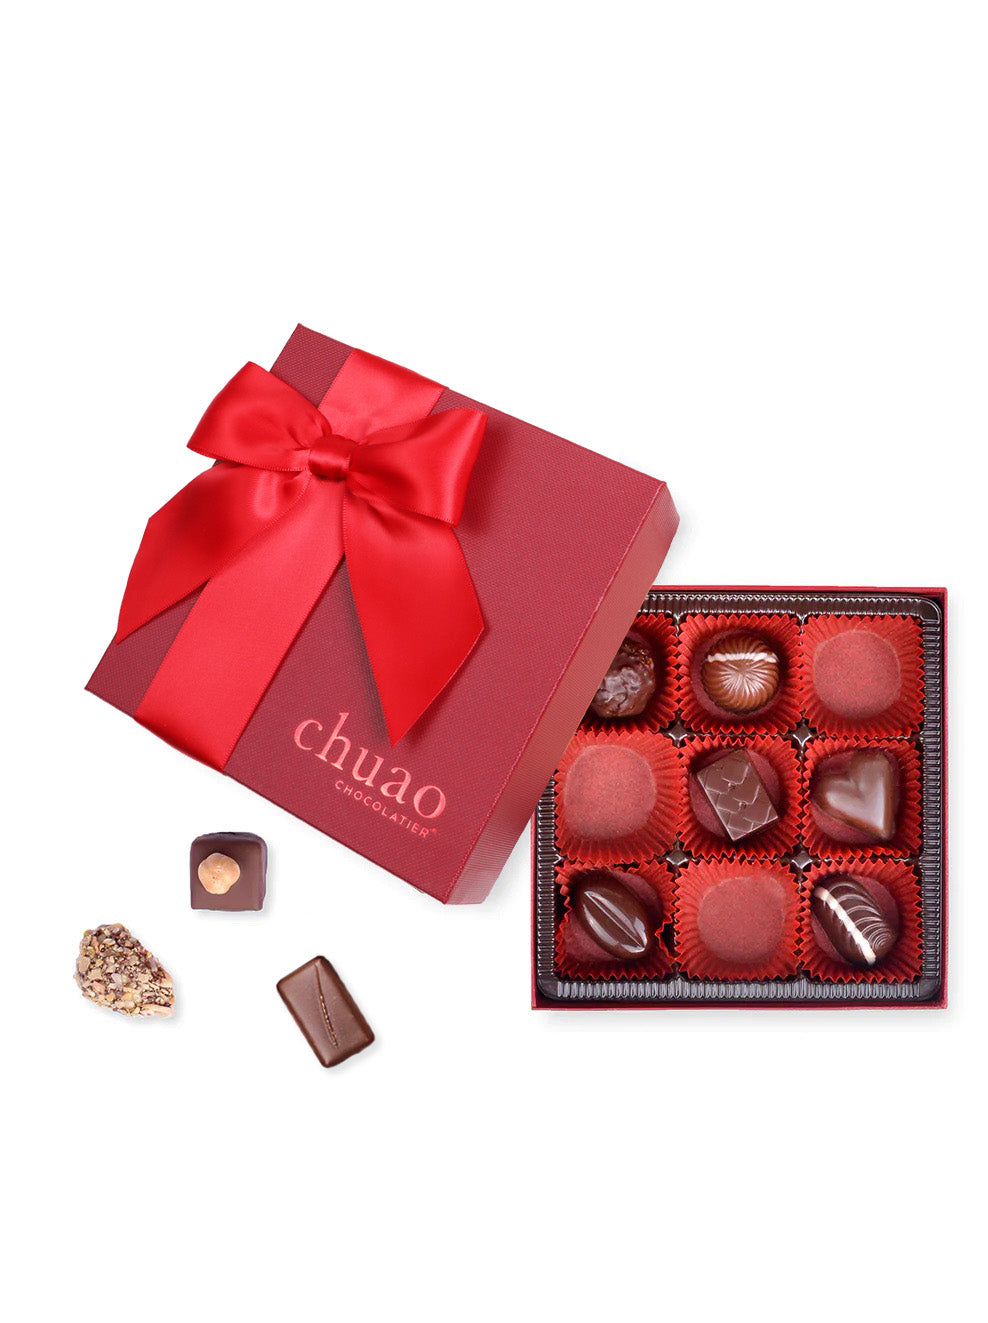 9 bonbons and truffles in a red square gift box tied with a red bow